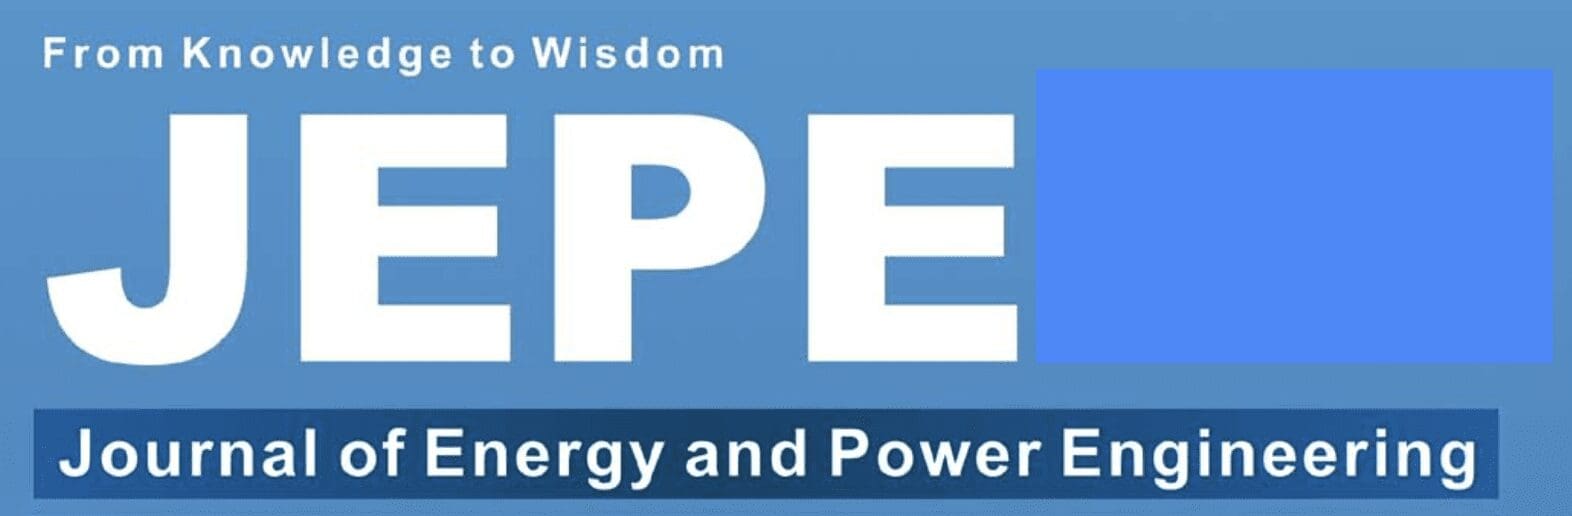 Journal of Energy and Power Engineering Logo